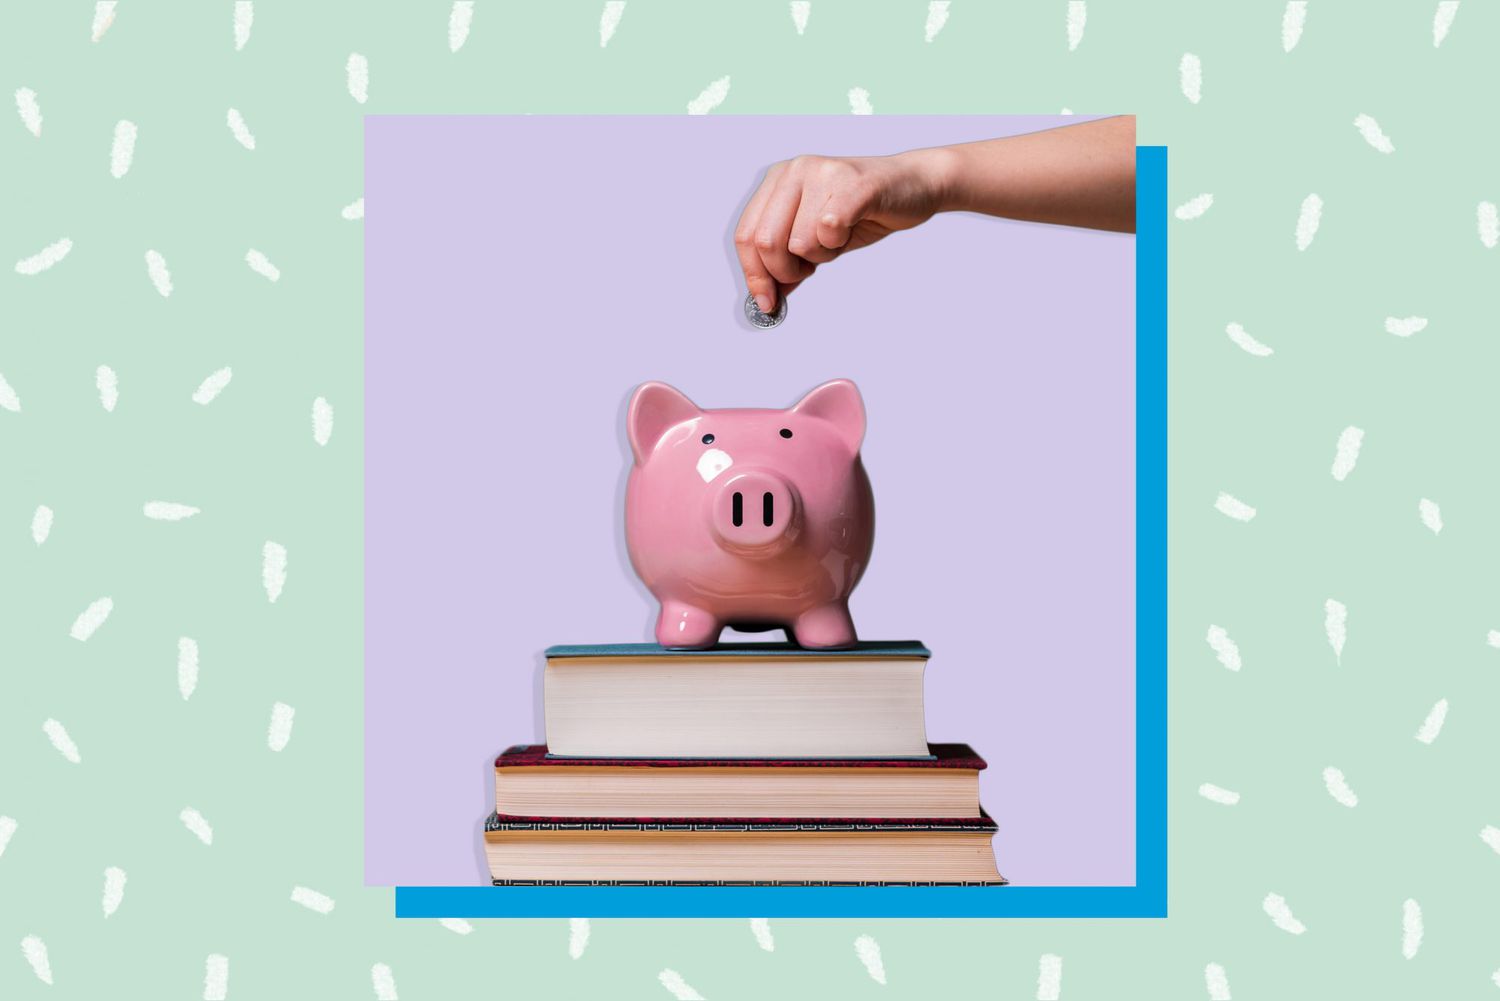 An image of a piggy bank on top of books.